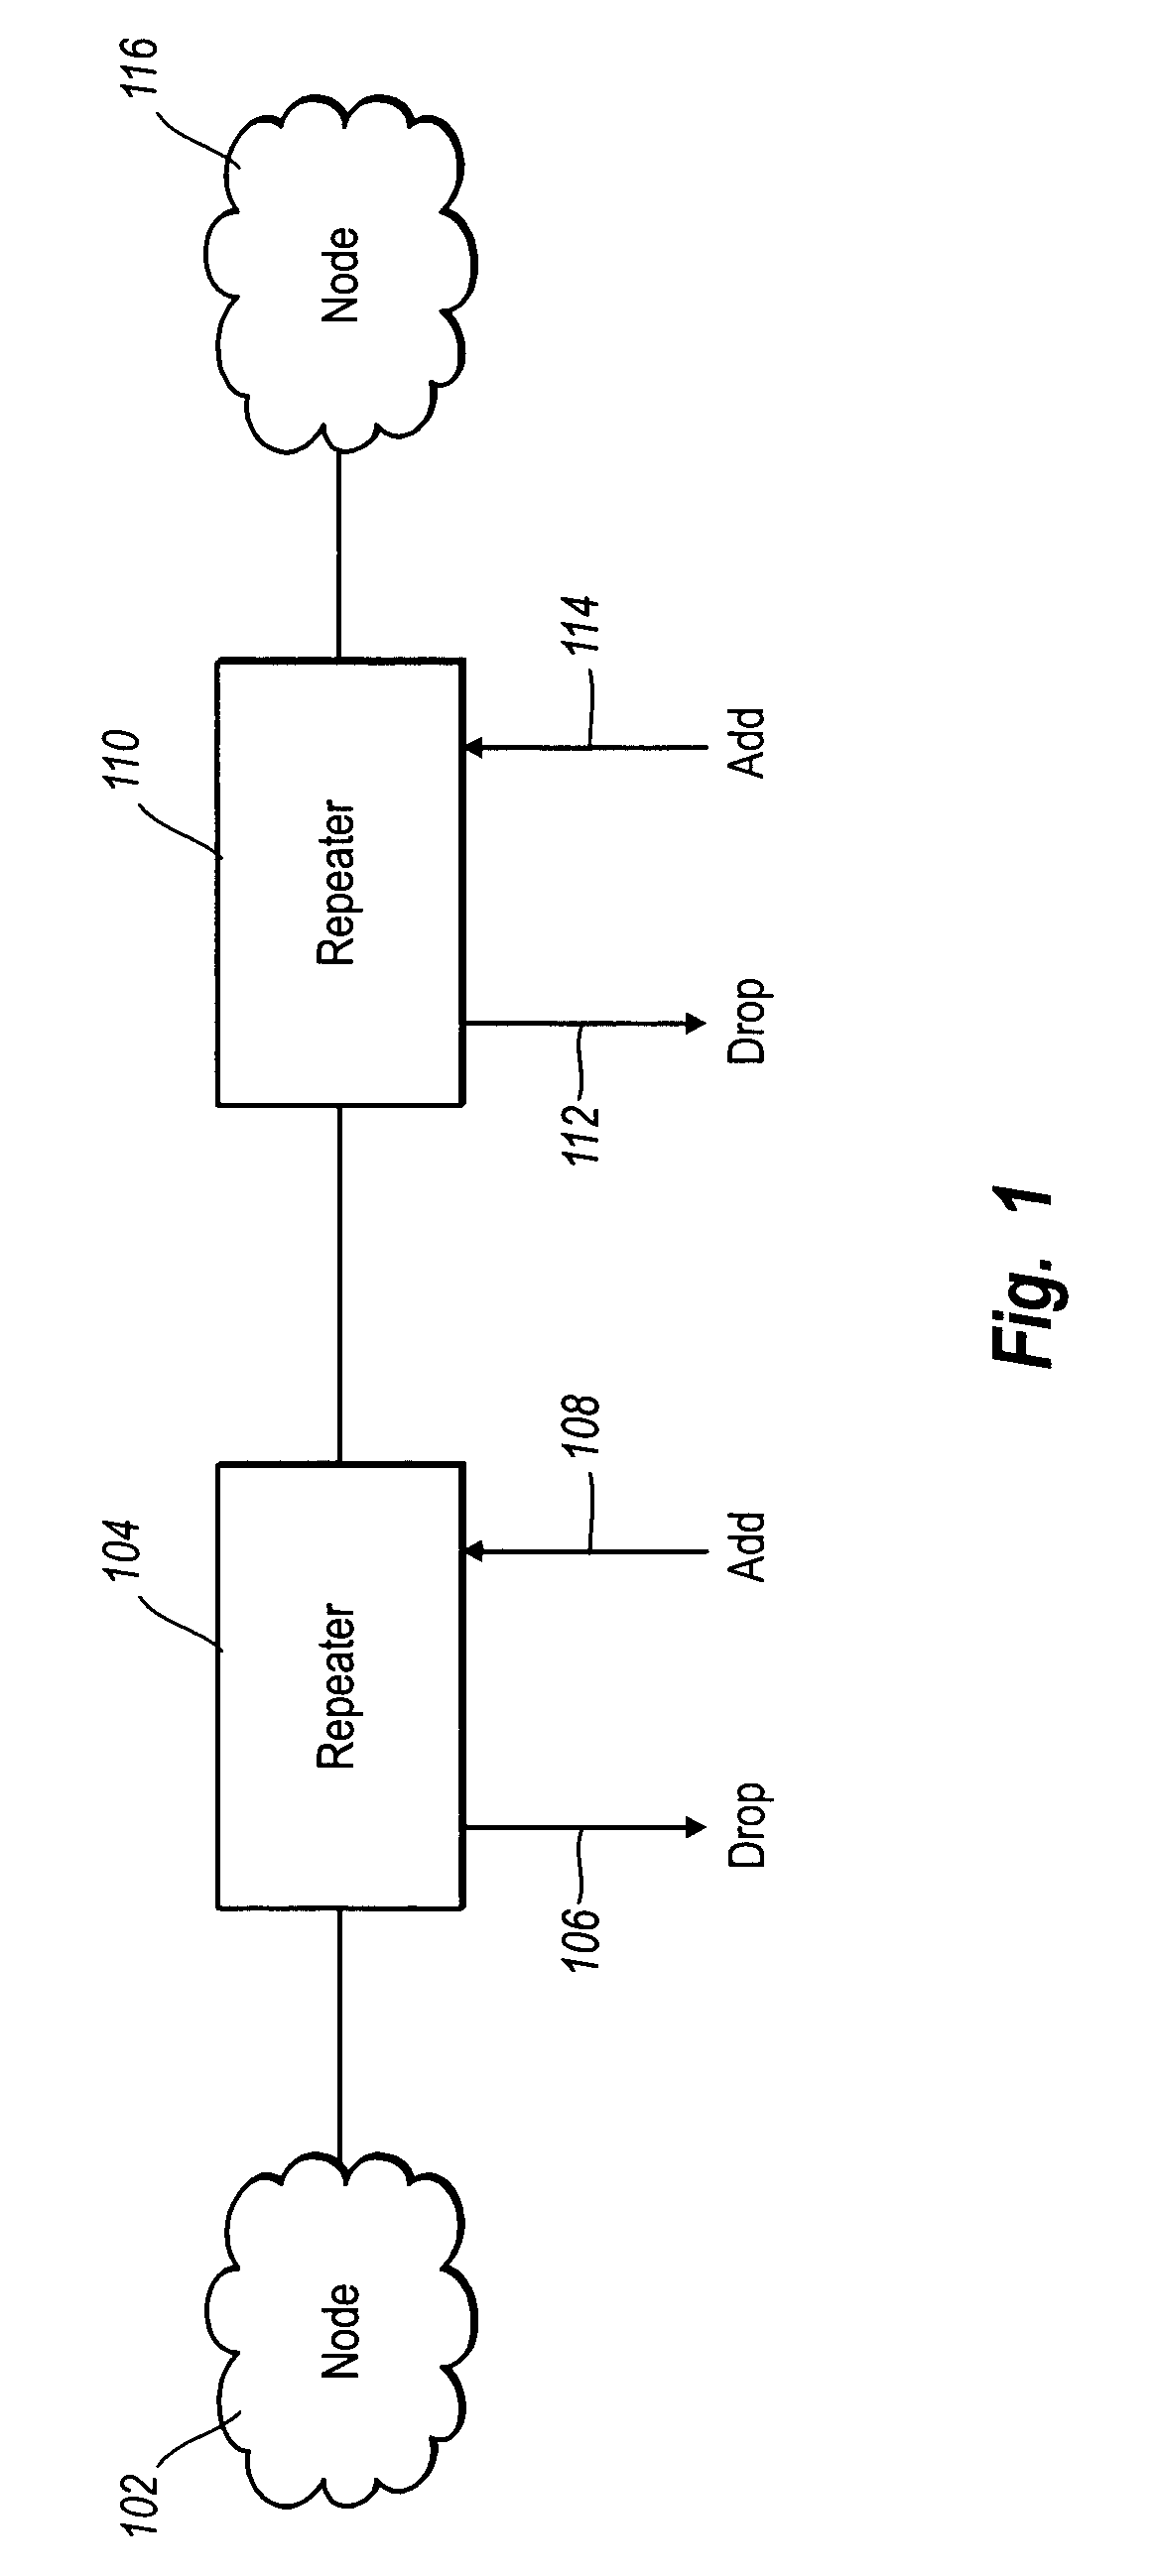 Scalable transceiver based repeater